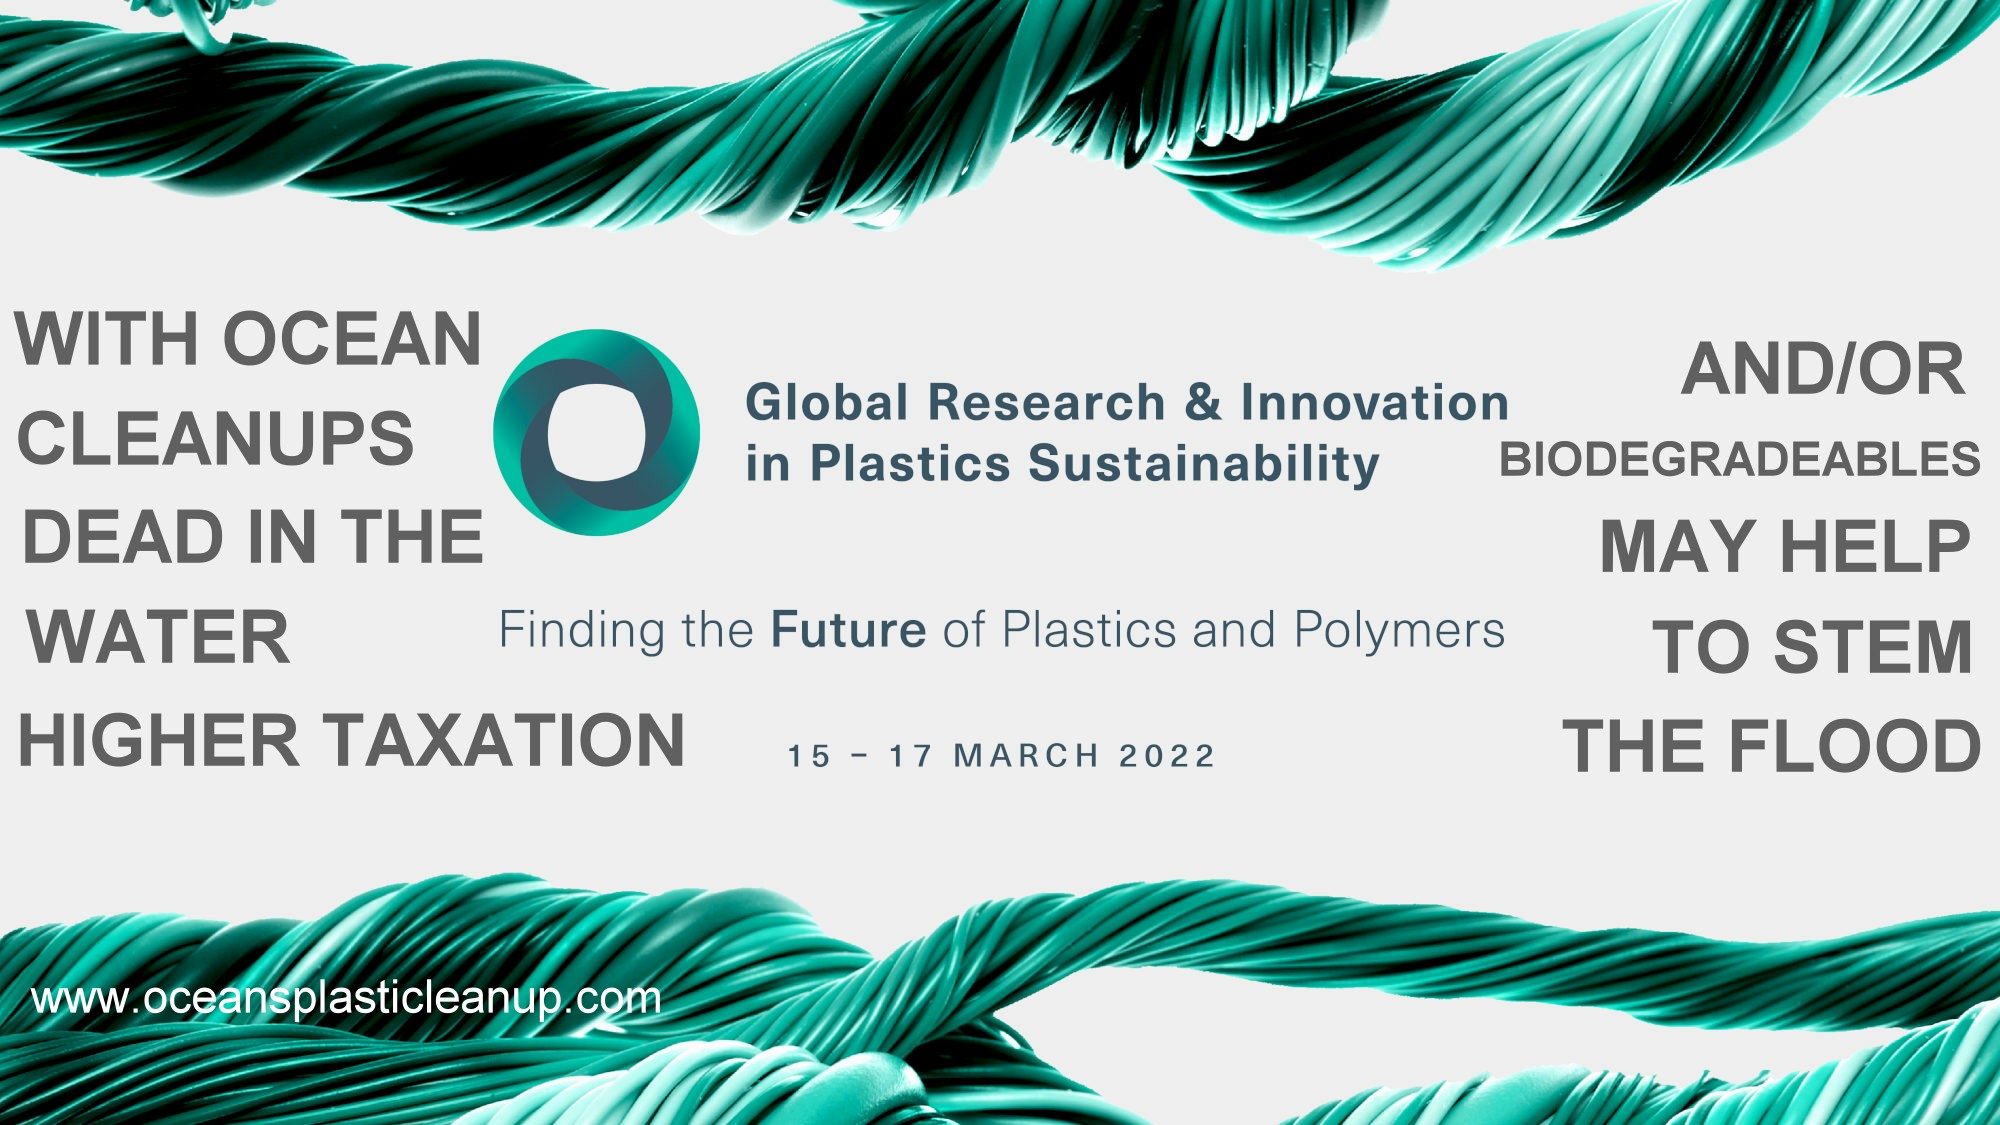 GRIPS March 15-17 2022 global reasearch and innovation in plastics use for a sustainable future